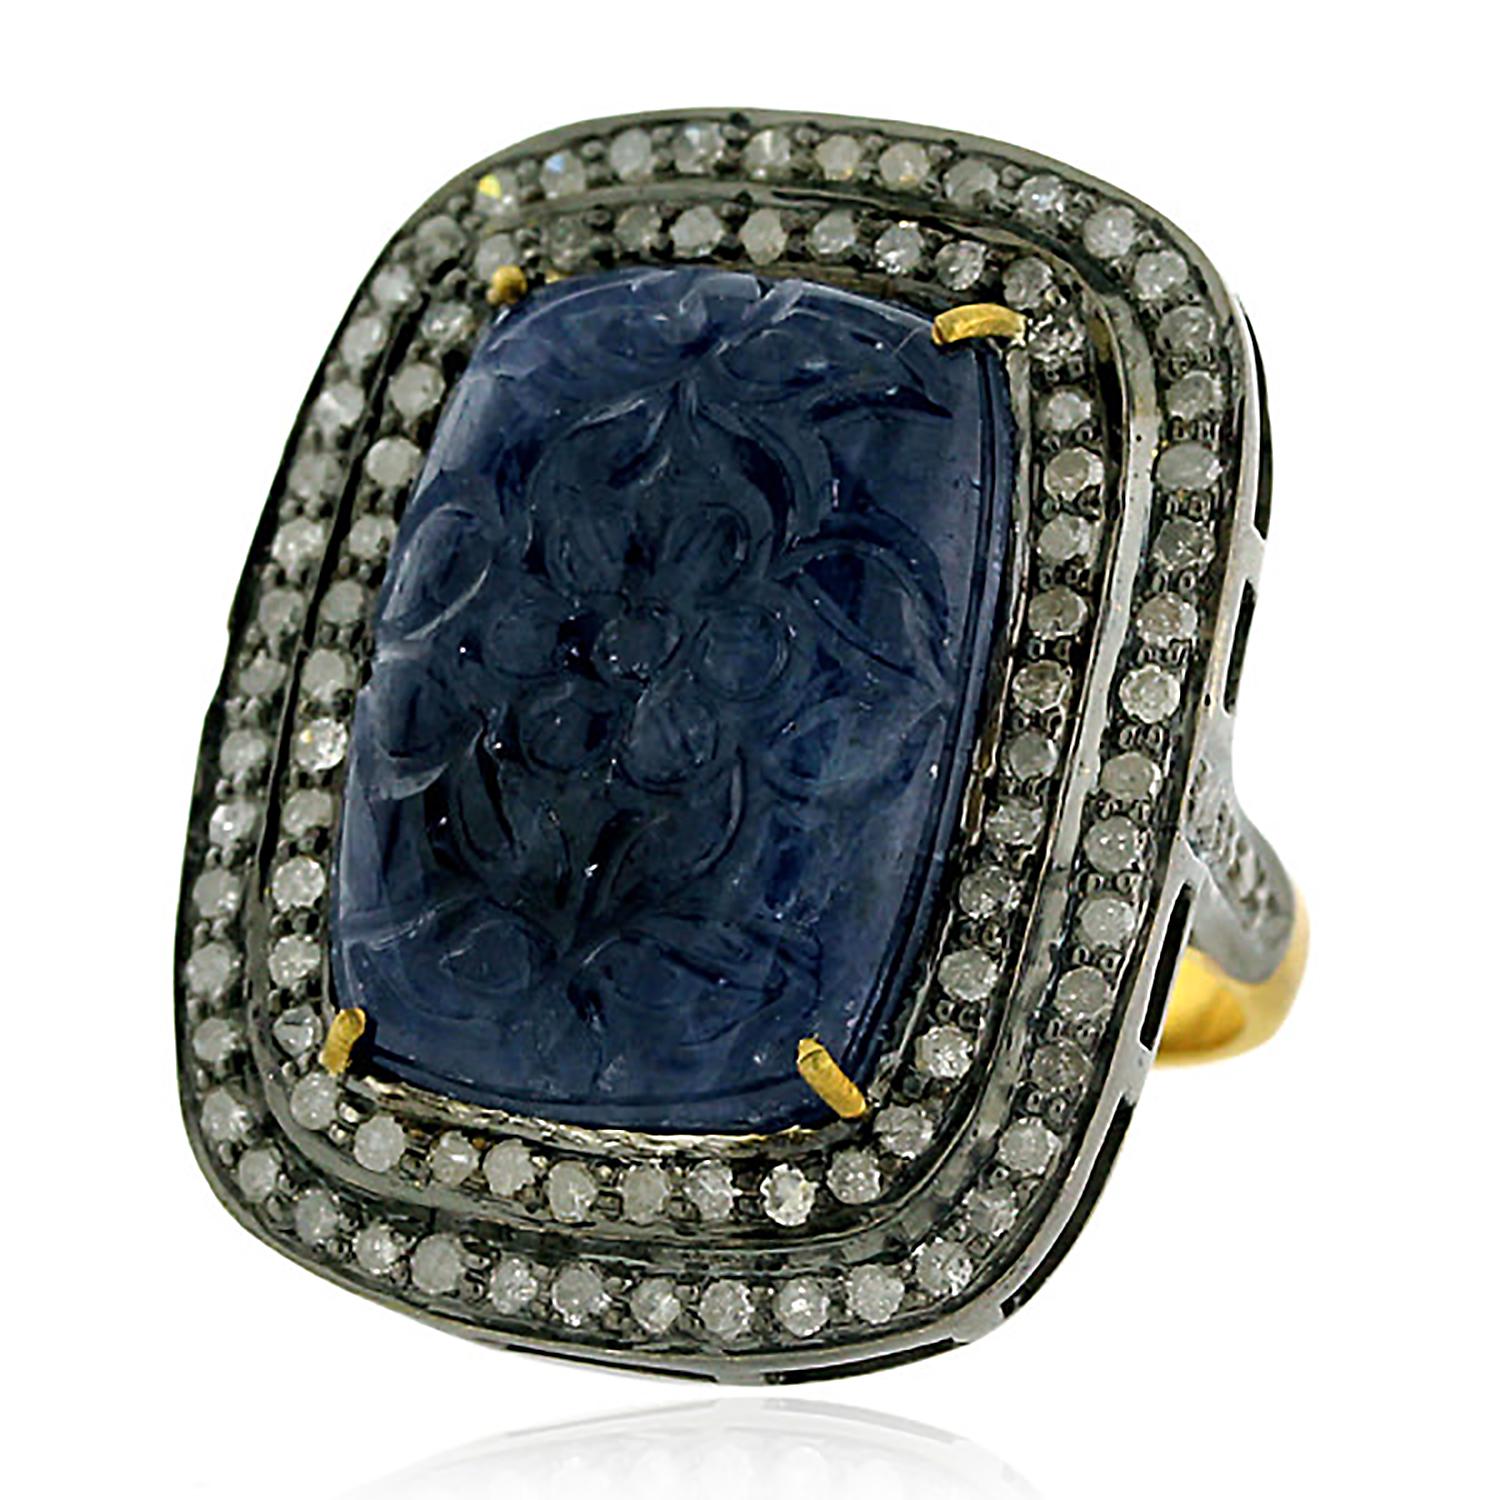 18.65ct Carved Blue Sapphire Cocktail Ring With Diamonds Made In 18k Gold In New Condition For Sale In New York, NY